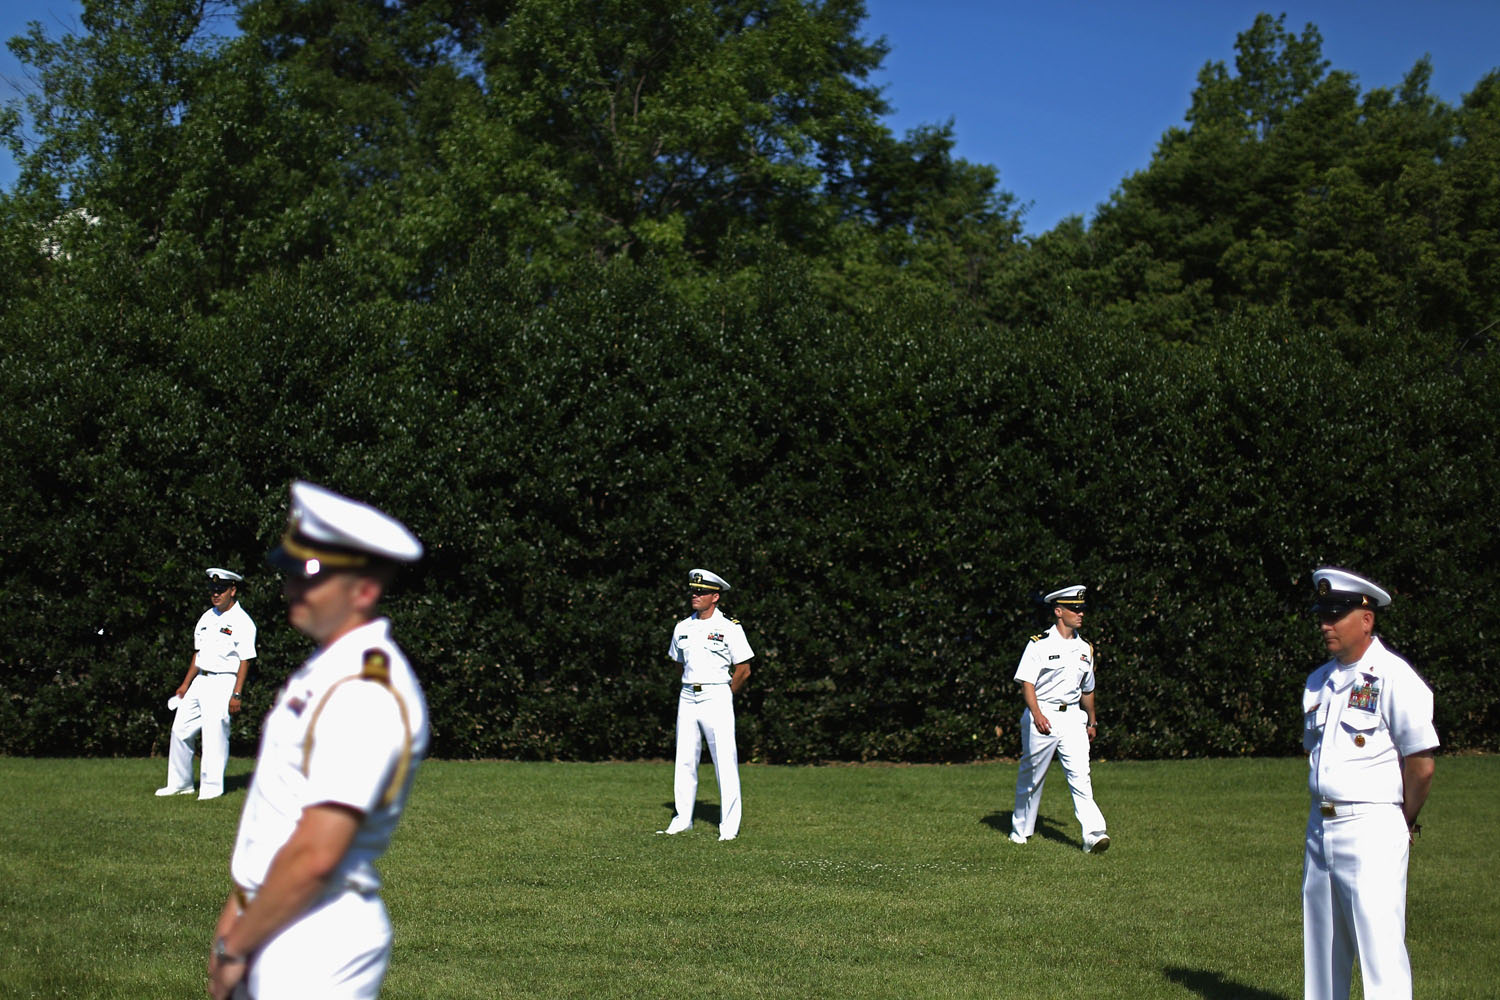 BESTPIX Remembrance Ceremony Held For Victims Of Washington Navy Yard Shootings